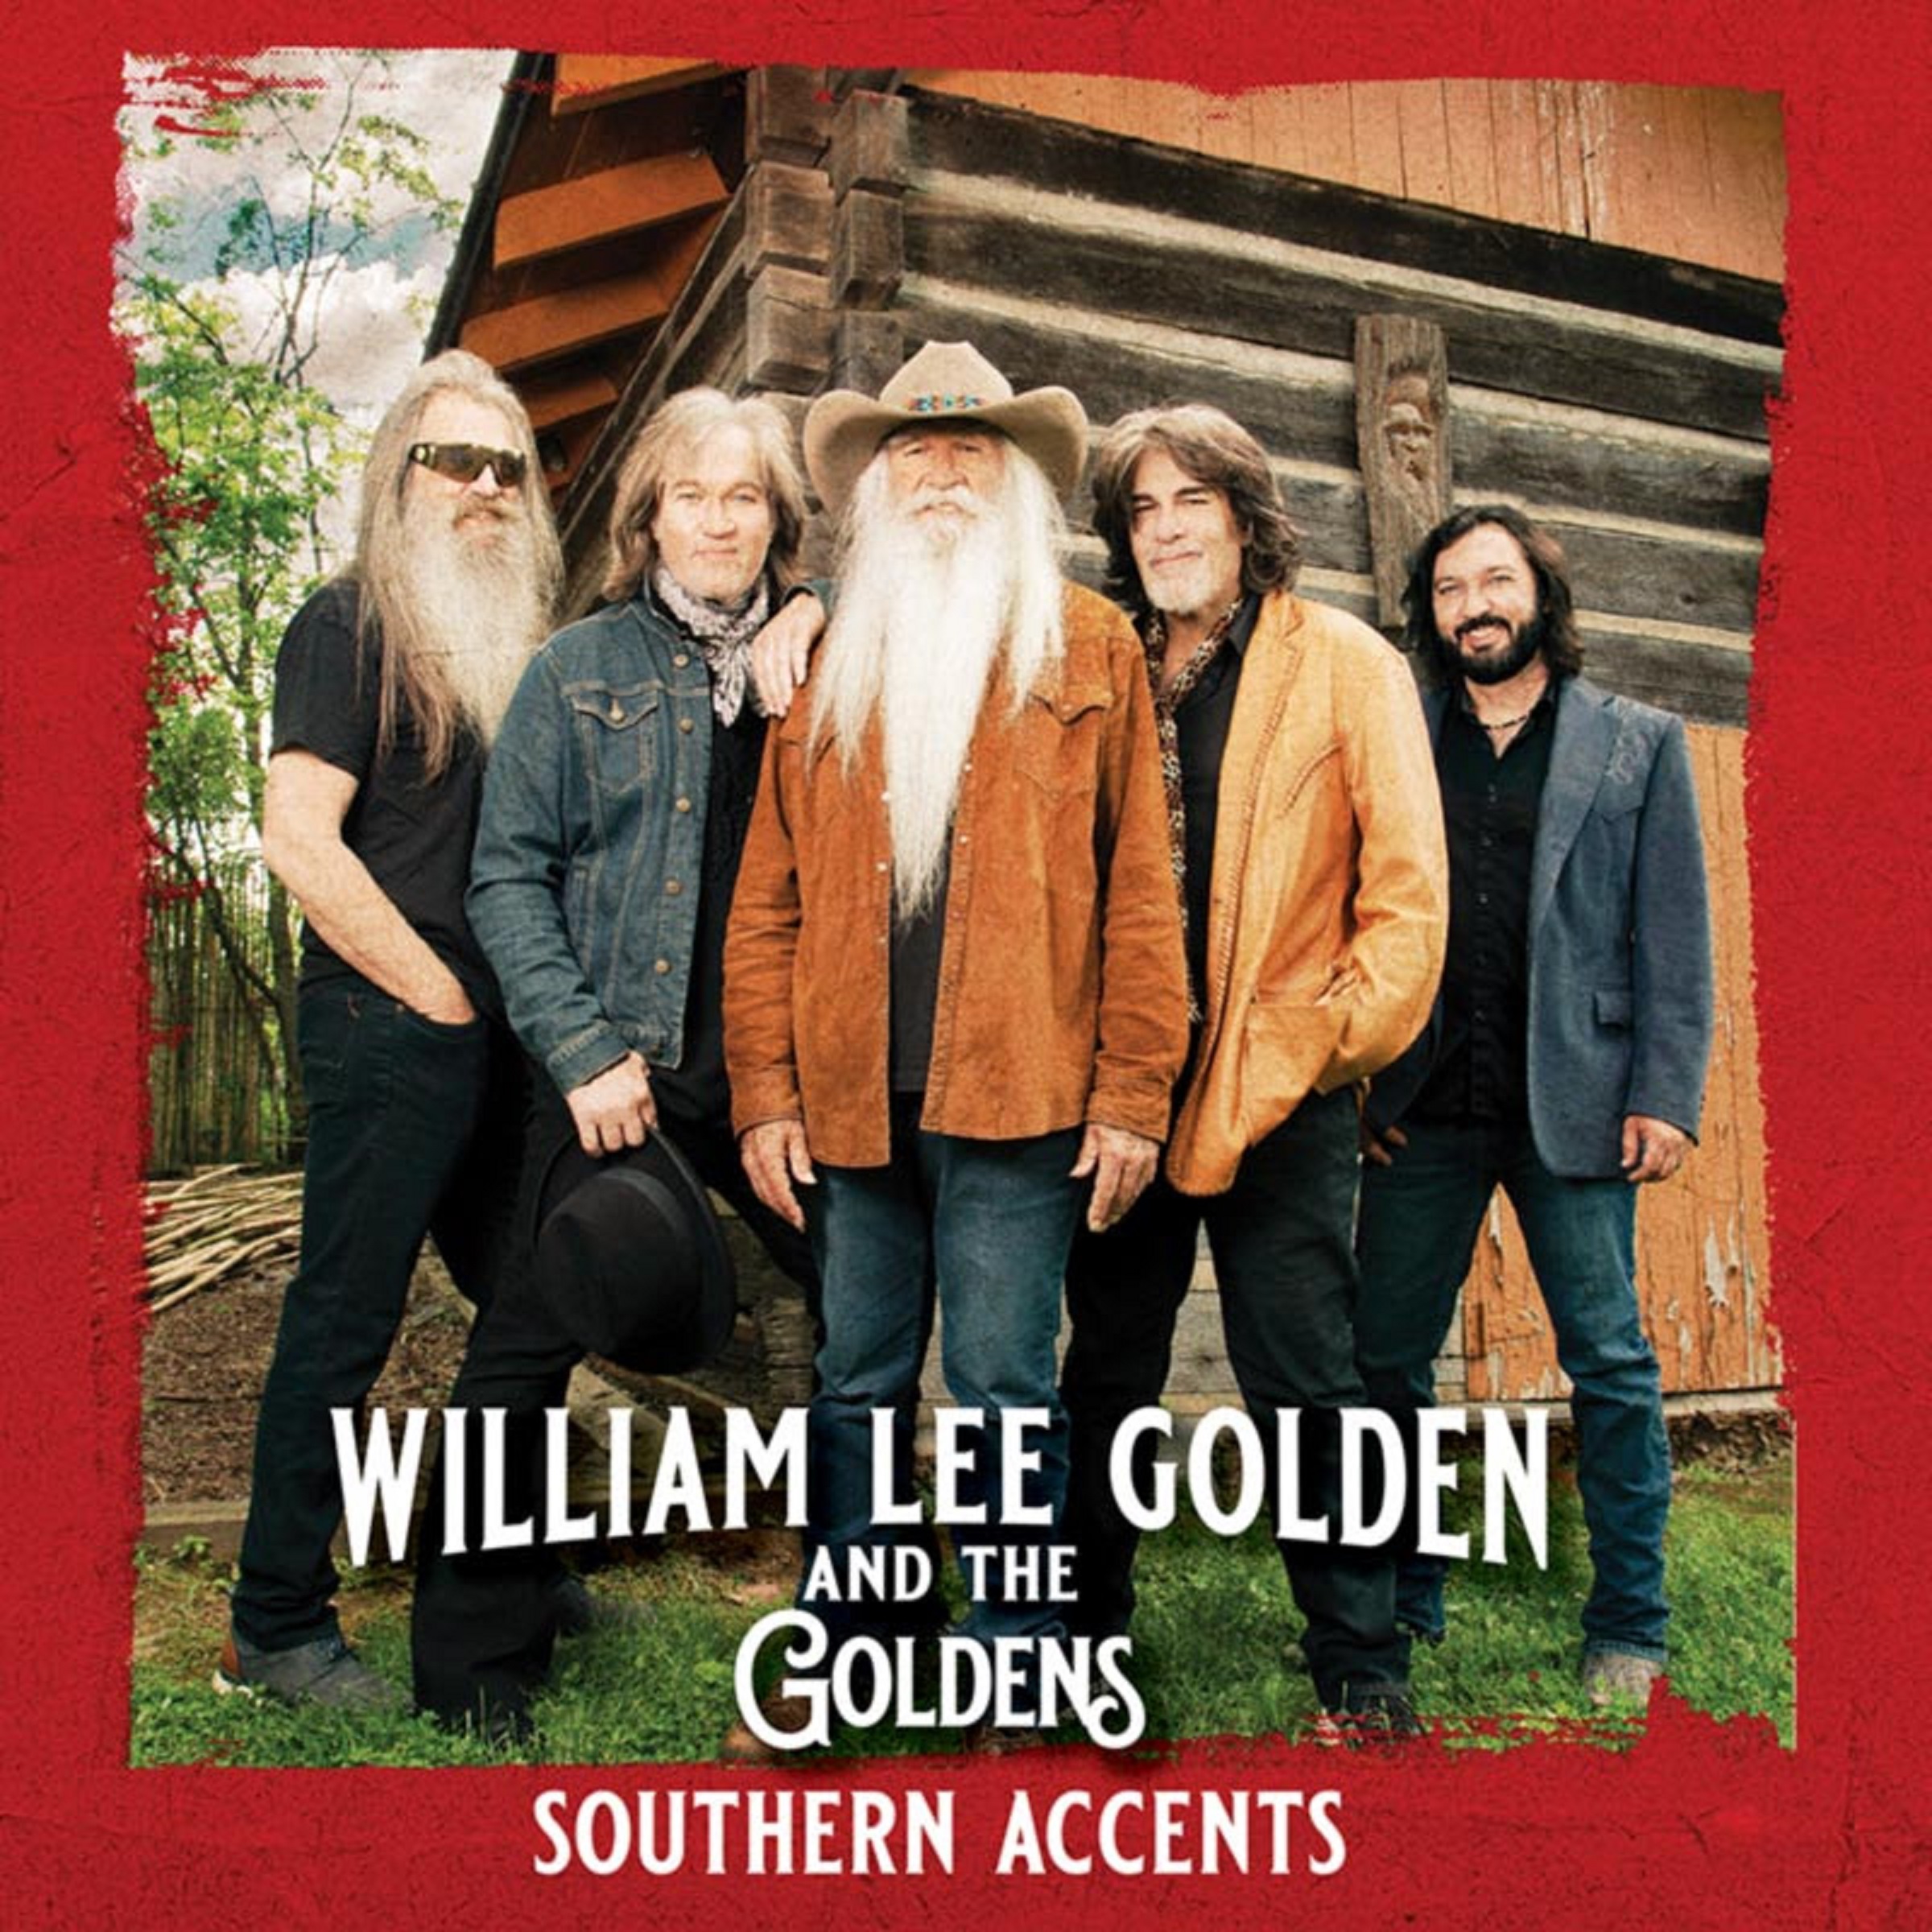 William Lee Golden and The Goldens Release 